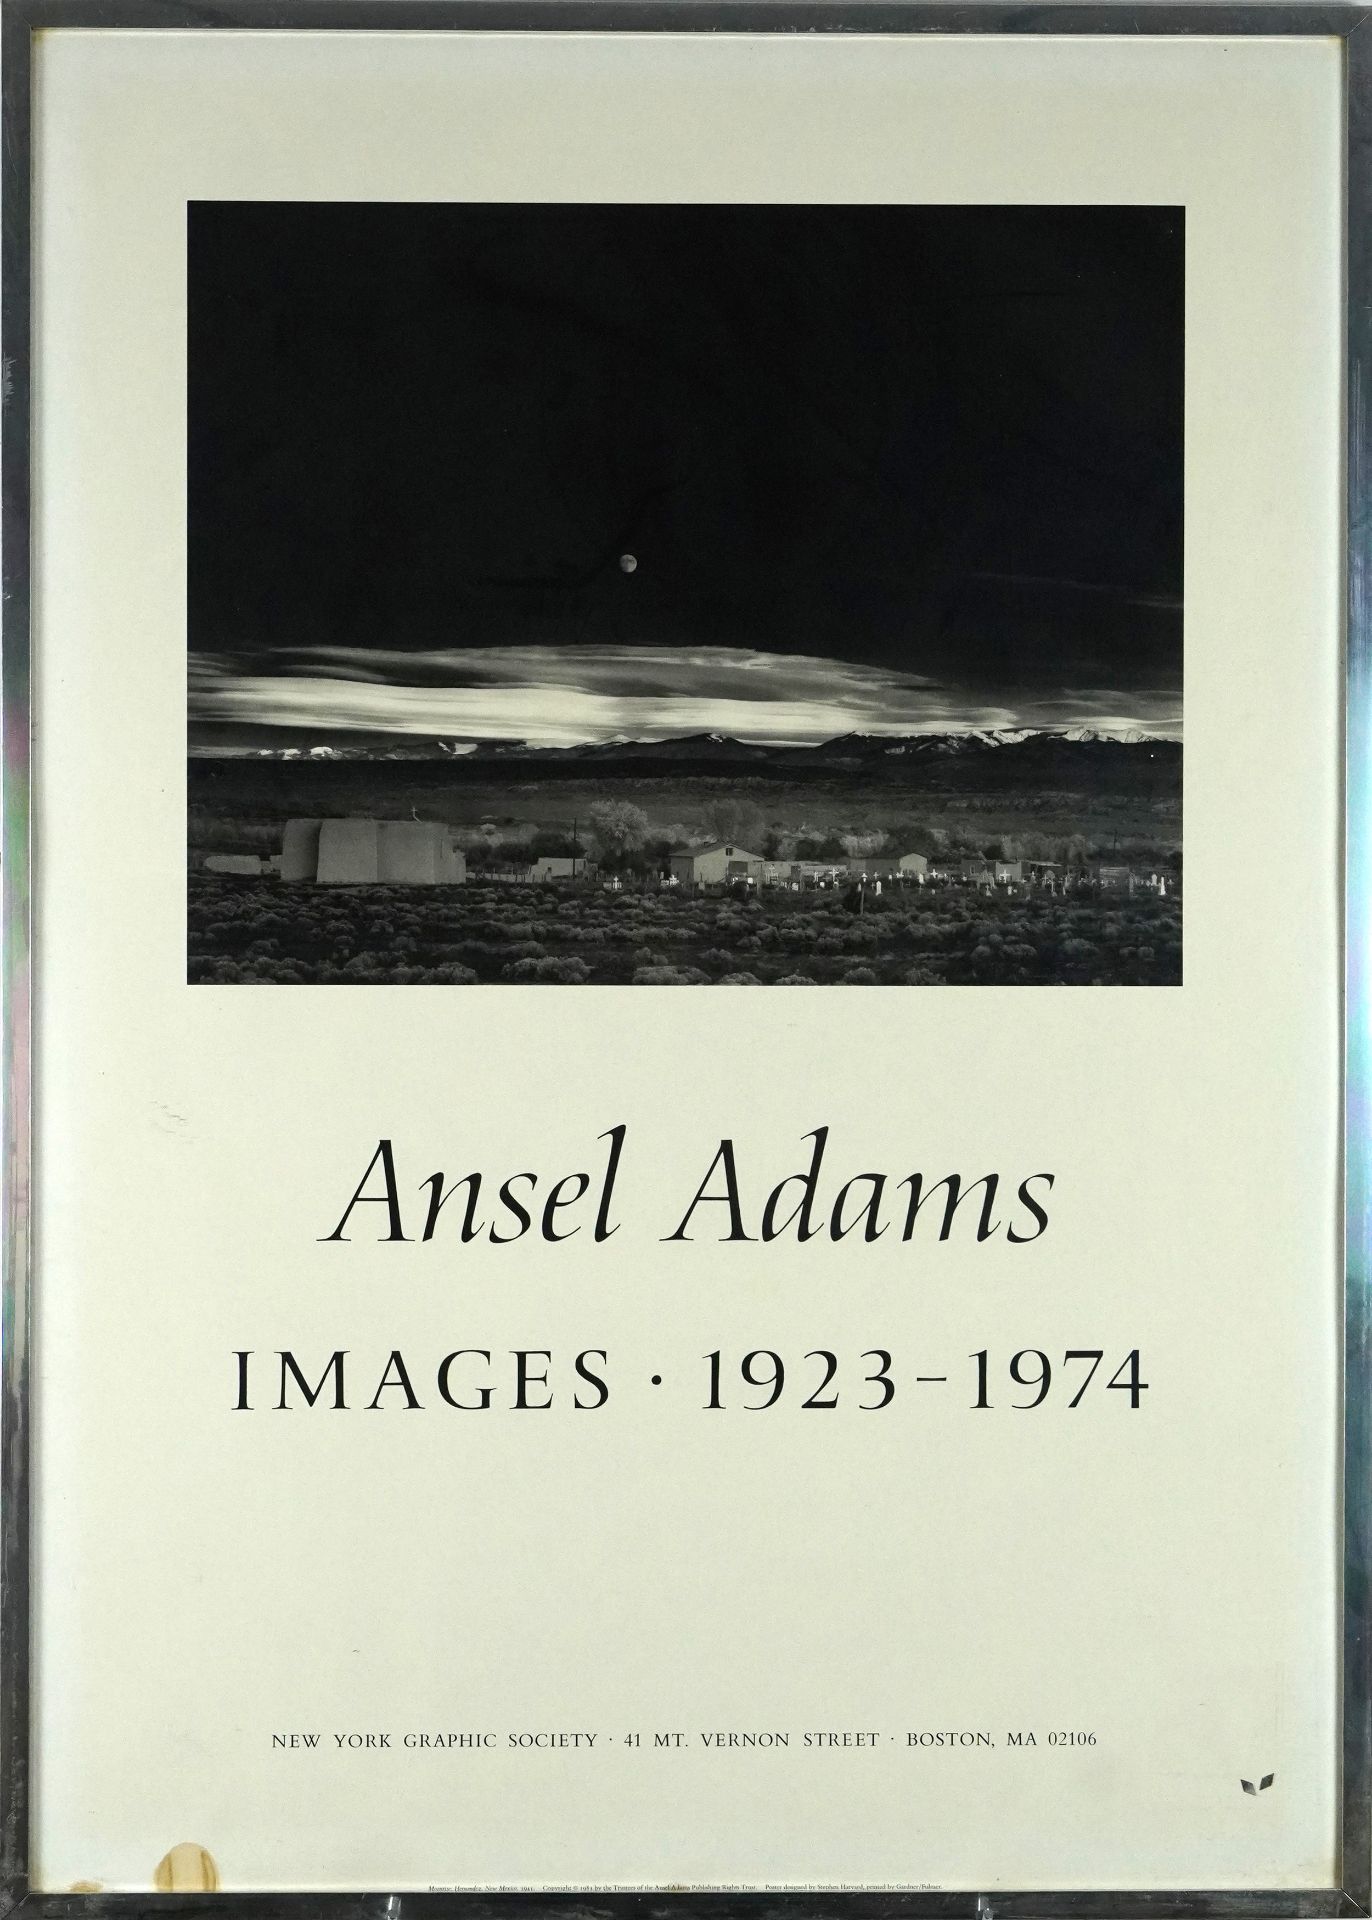 Ansel Adams Images 1923-1974 gallery poster, New York Graphics Society, framed and glazed, 90cm x - Image 2 of 3